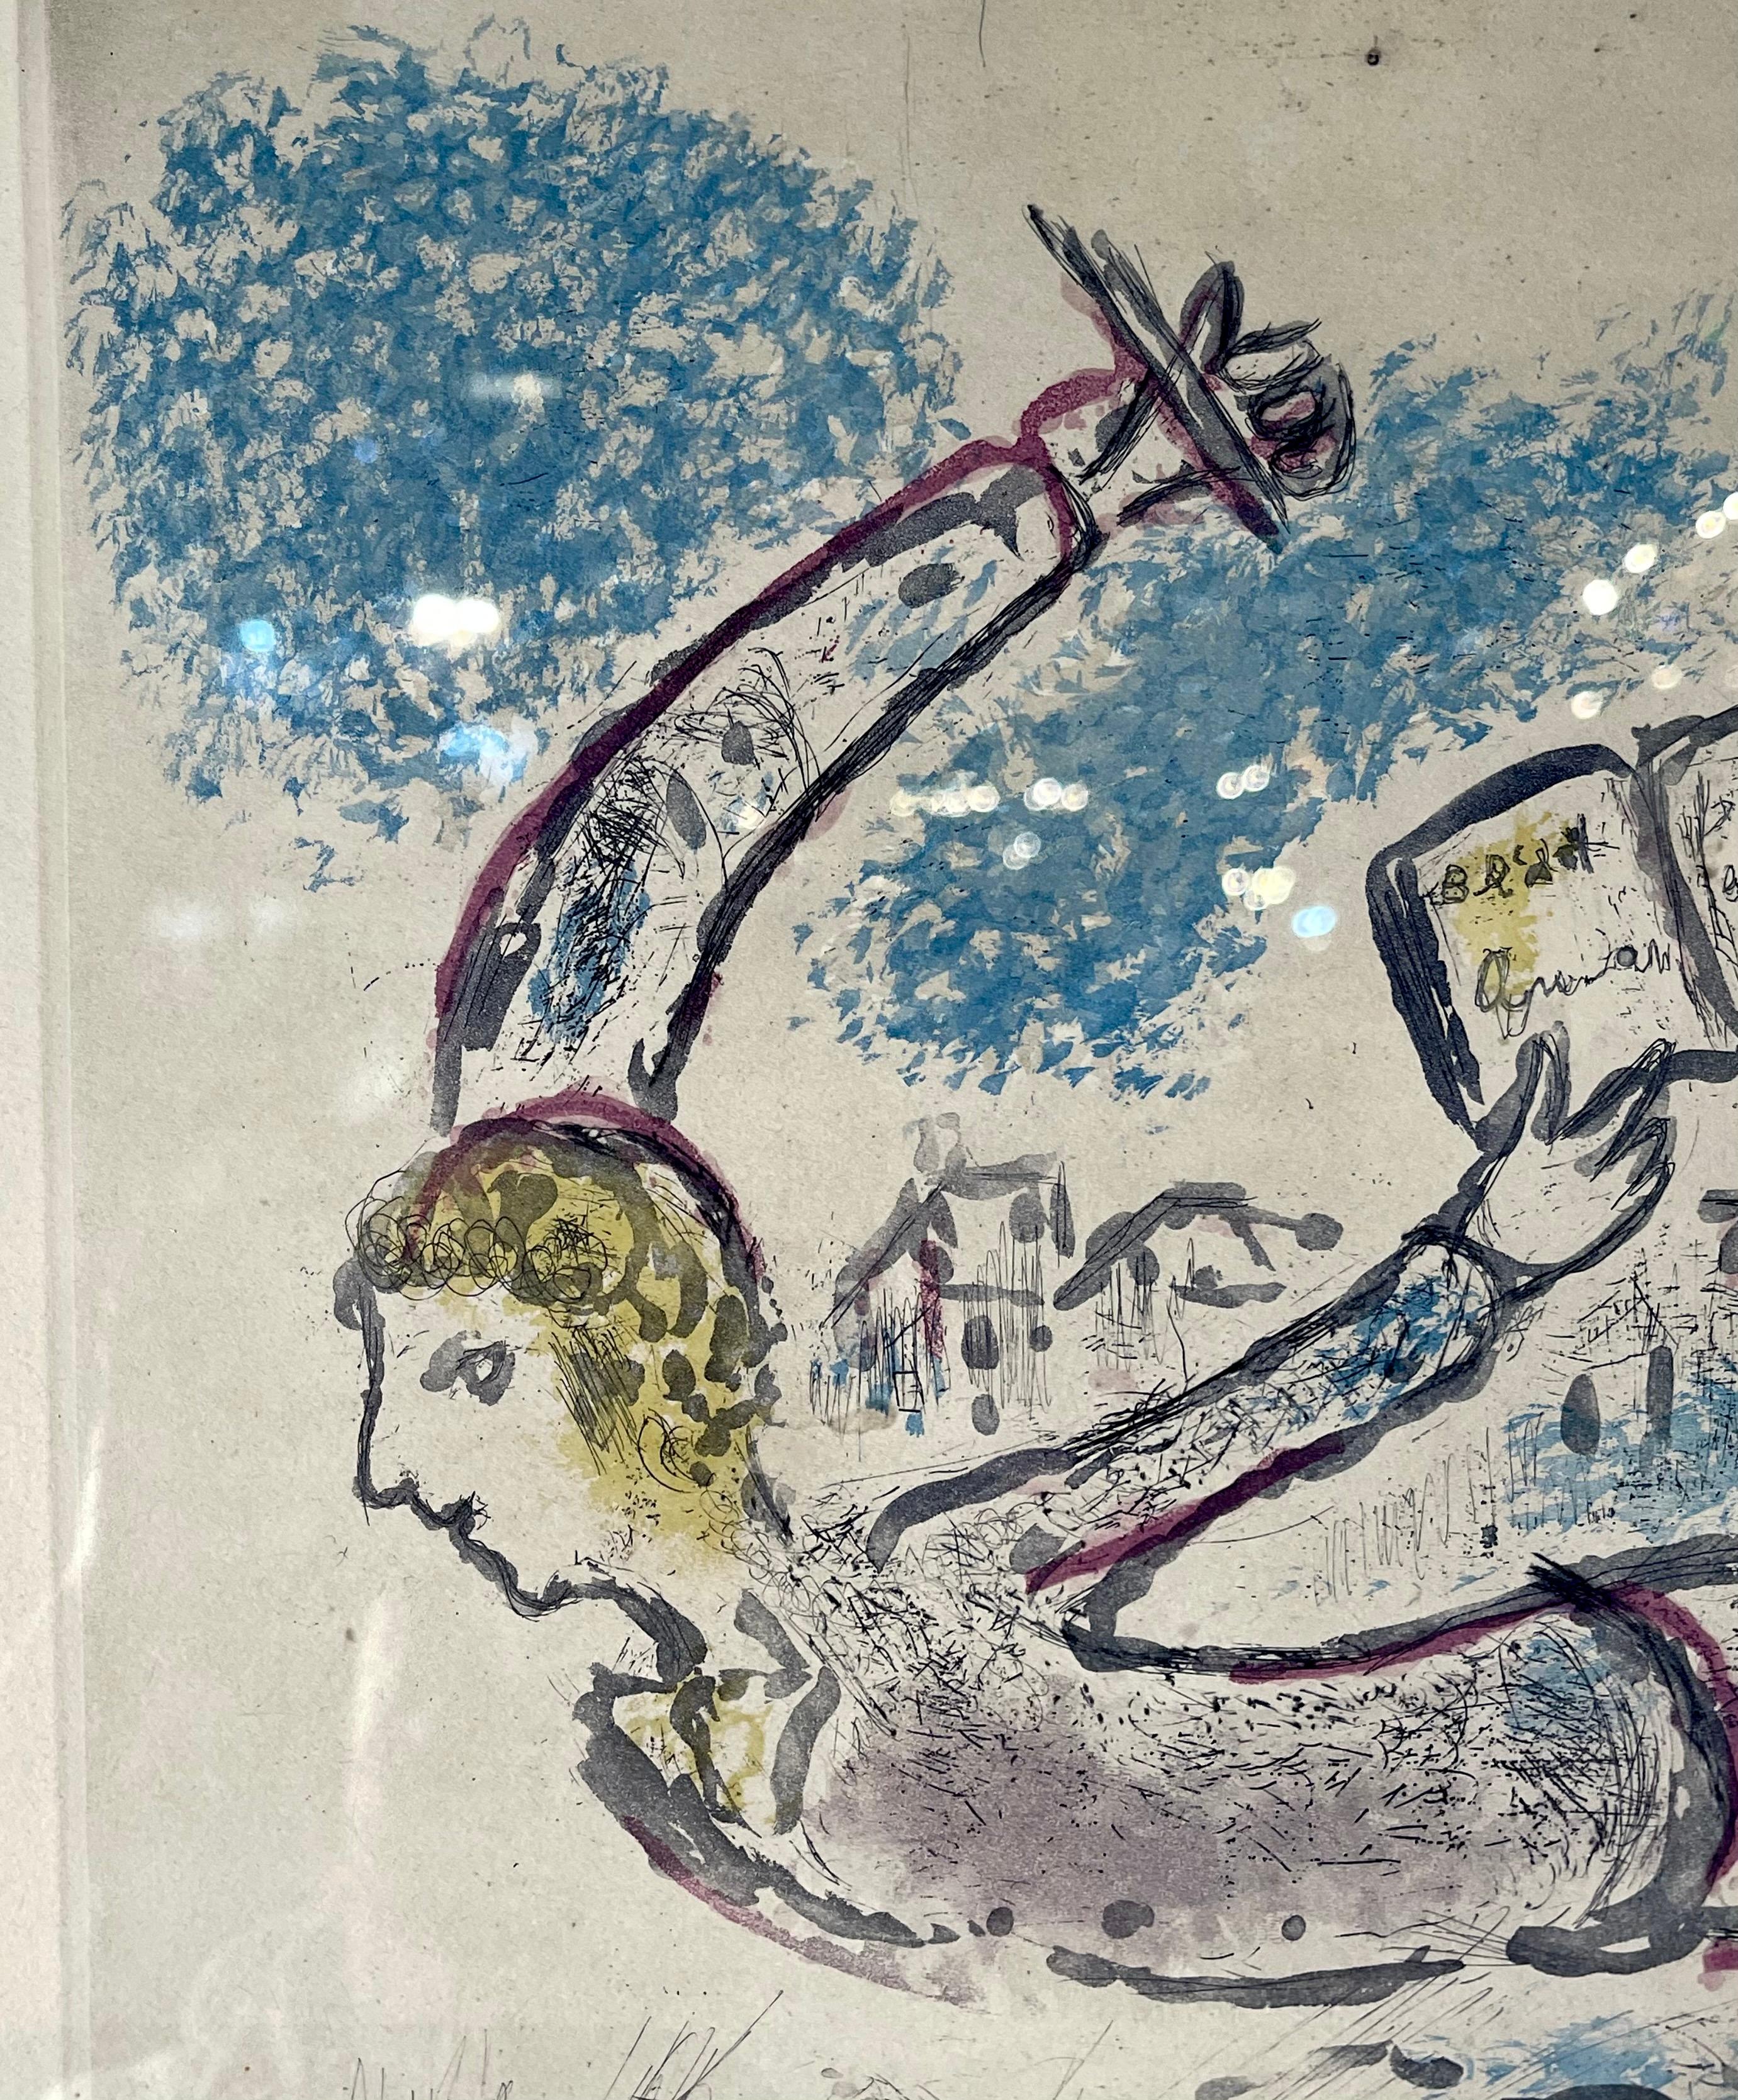 Modern Marc Chagall, Etching Plate 2, from De Mauvais Sujets (Bad Elements), 1958